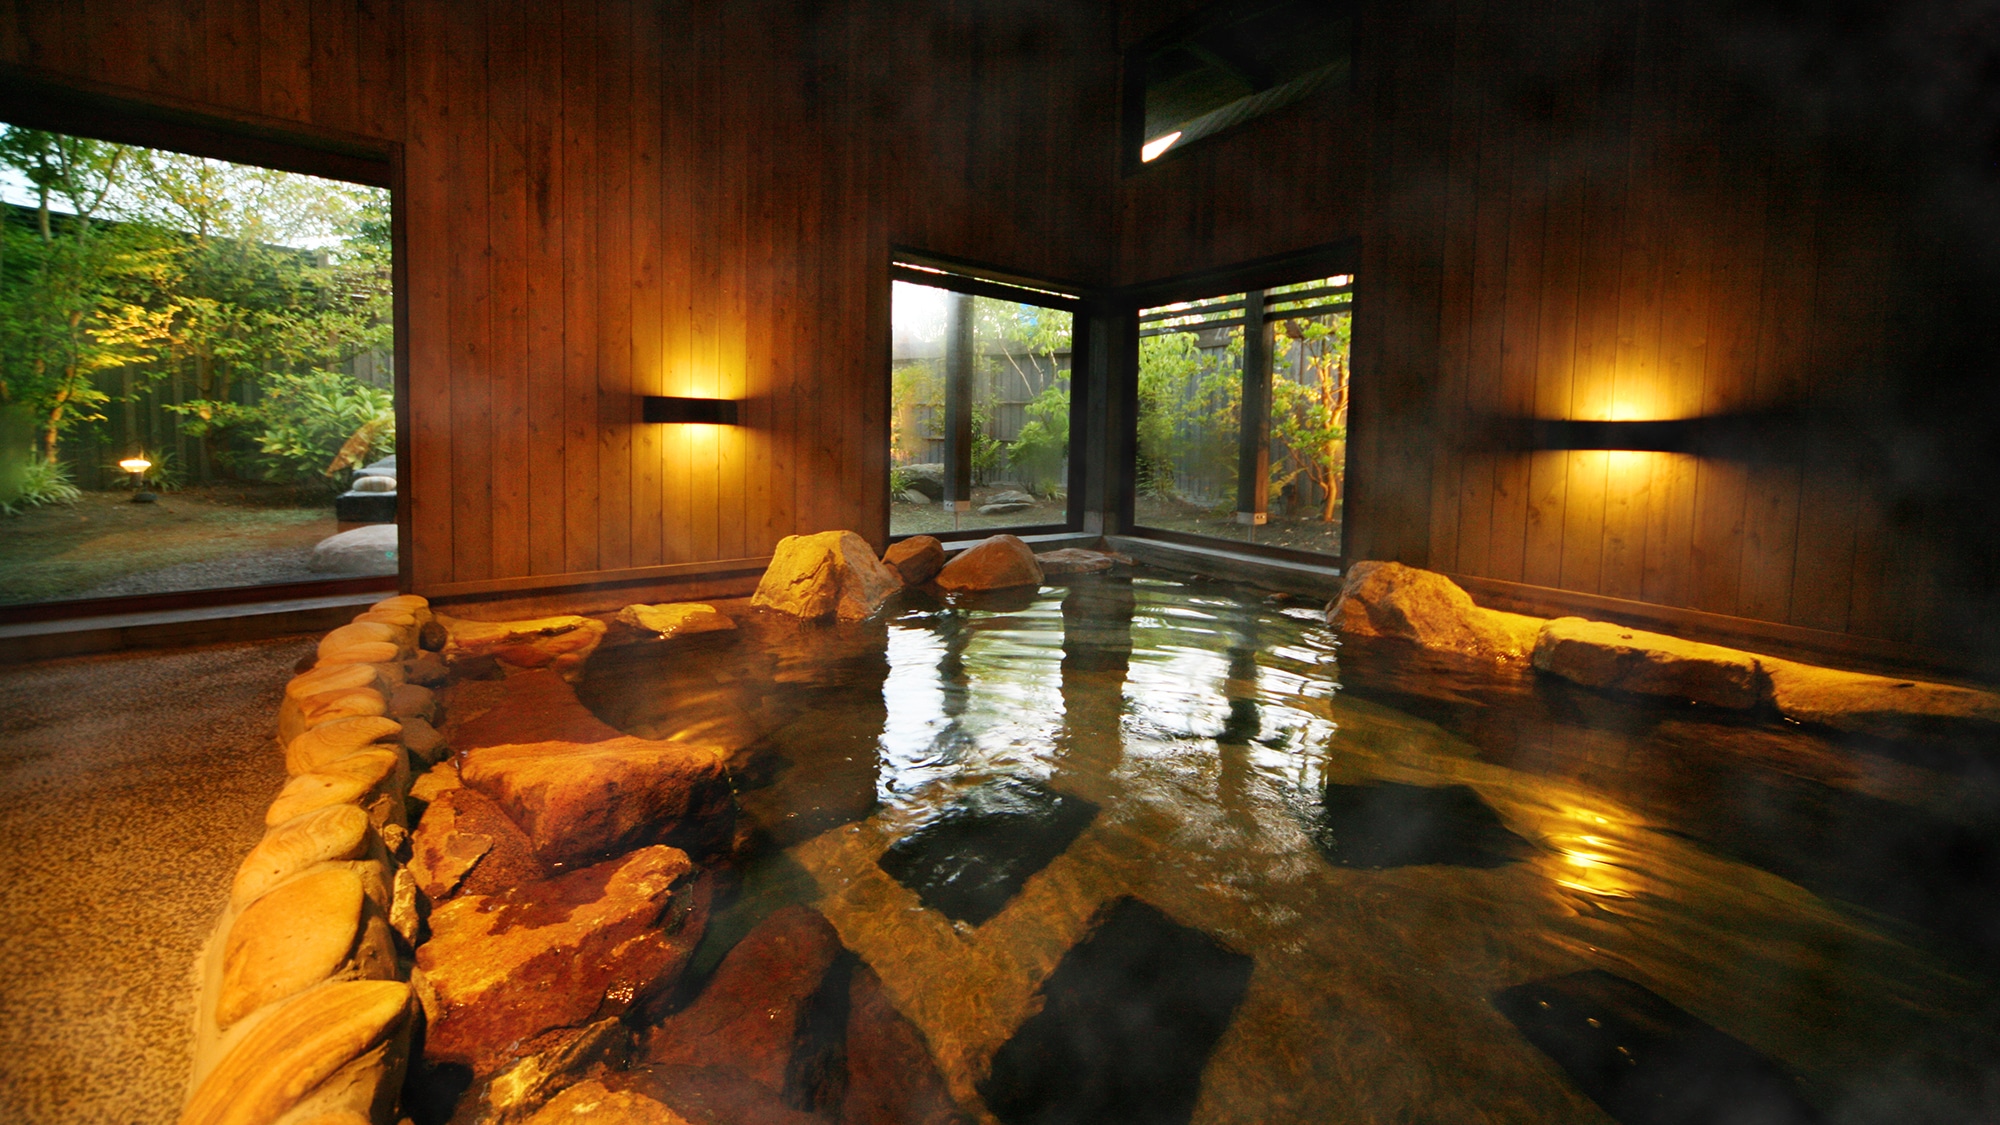 ◆ Large communal bath ◇ Indoor bath ◆ In a large bathtub, stretch out your limbs and make a "Miyanojo Onsen"